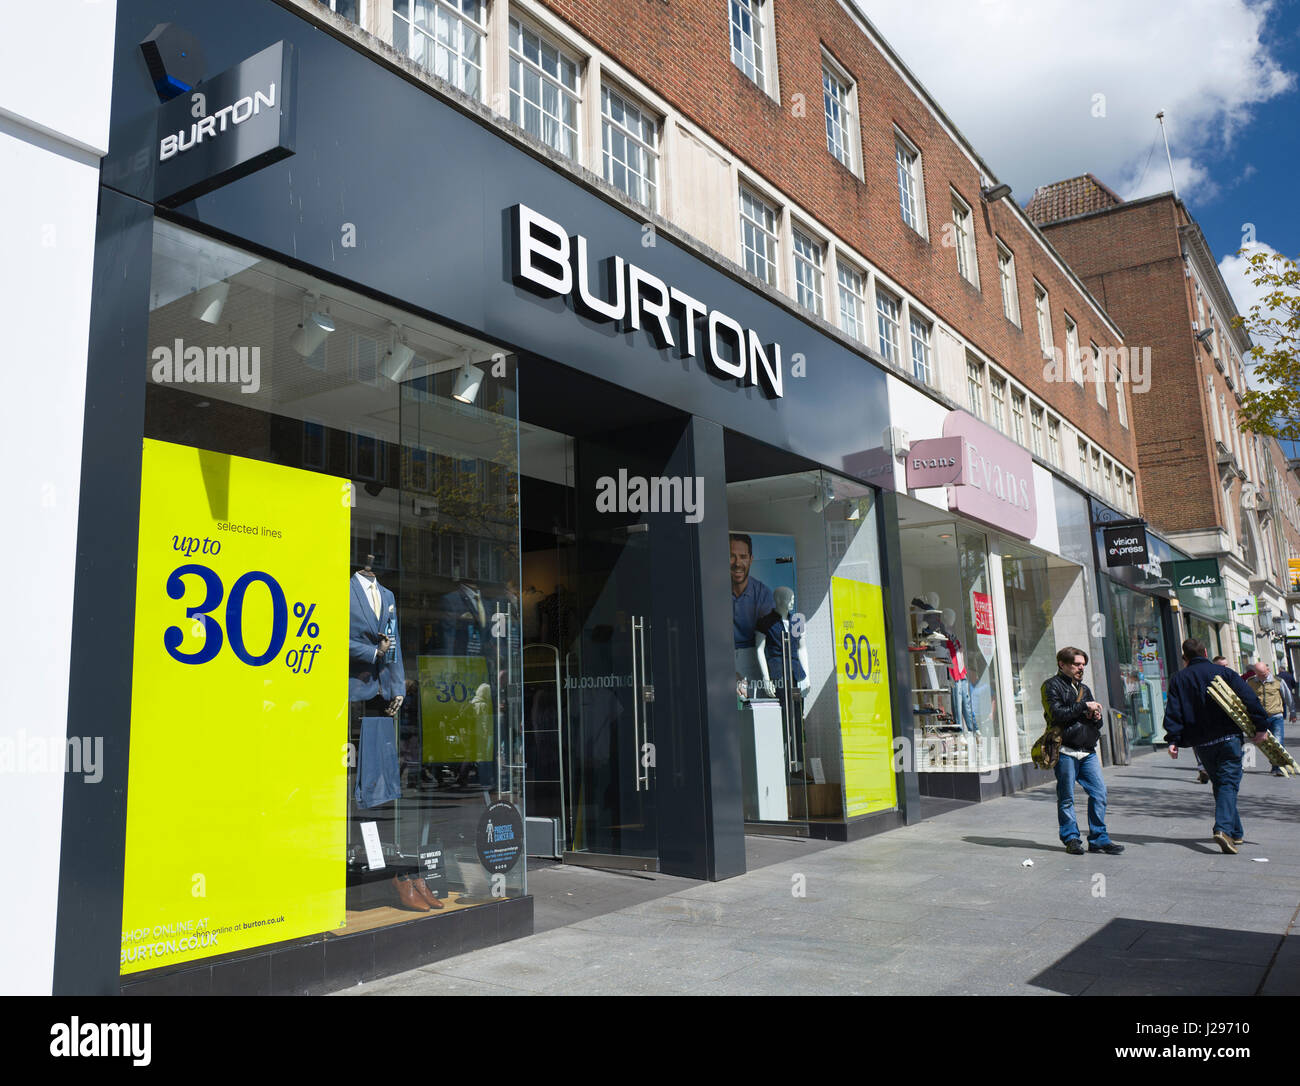 Burton Store High Resolution Stock Photography and Images - Alamy